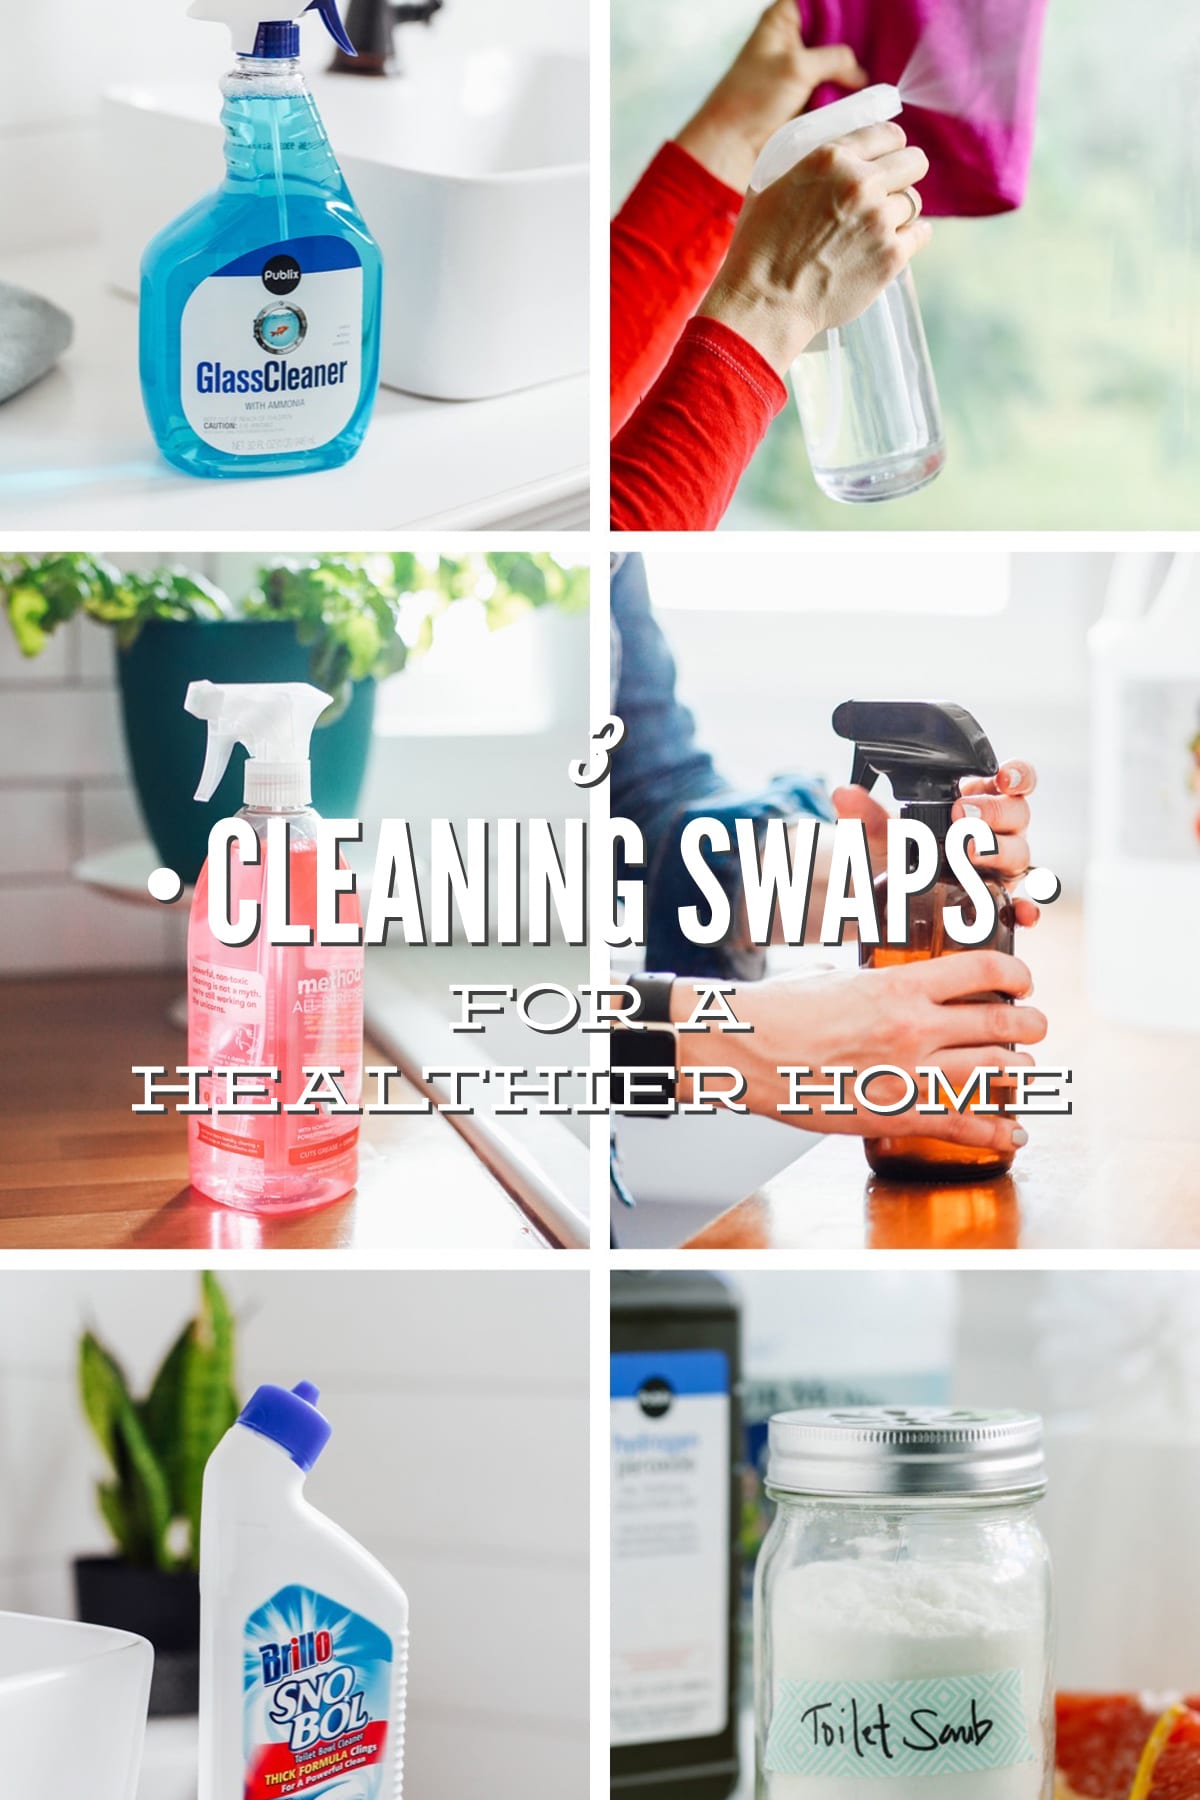 3 Cleaning Swaps for a Healthier Home - Live Simply